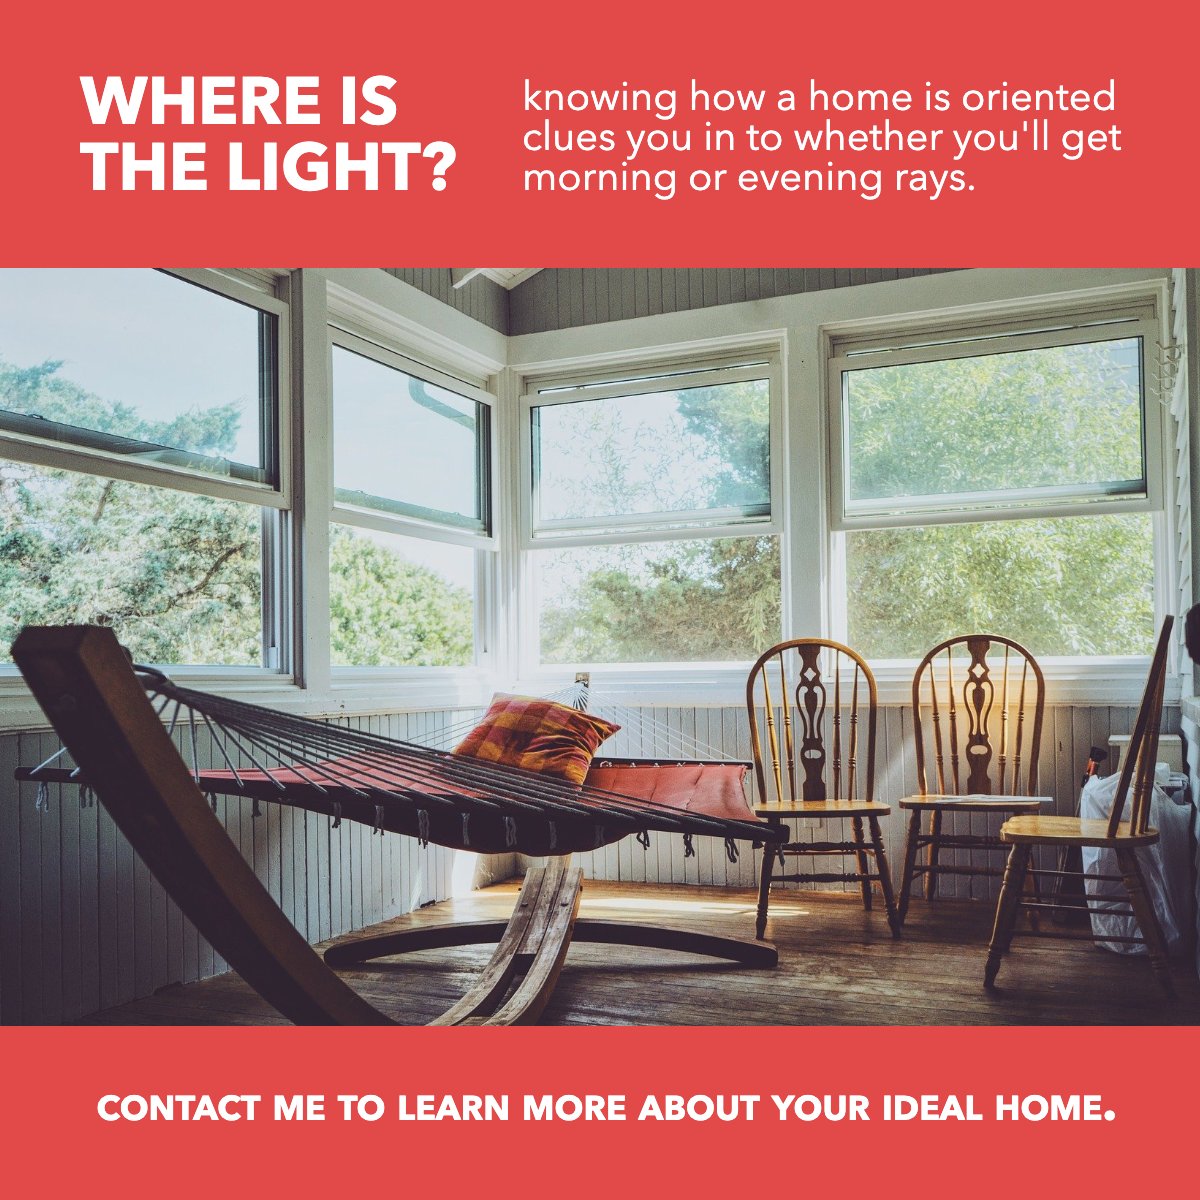 Where is the light? 🤔

Knowing how a home is oriented, clues you in to whether you'll get morning or evening rays. ☀️

#sunlight #housegoals #morninglight #eveninglight